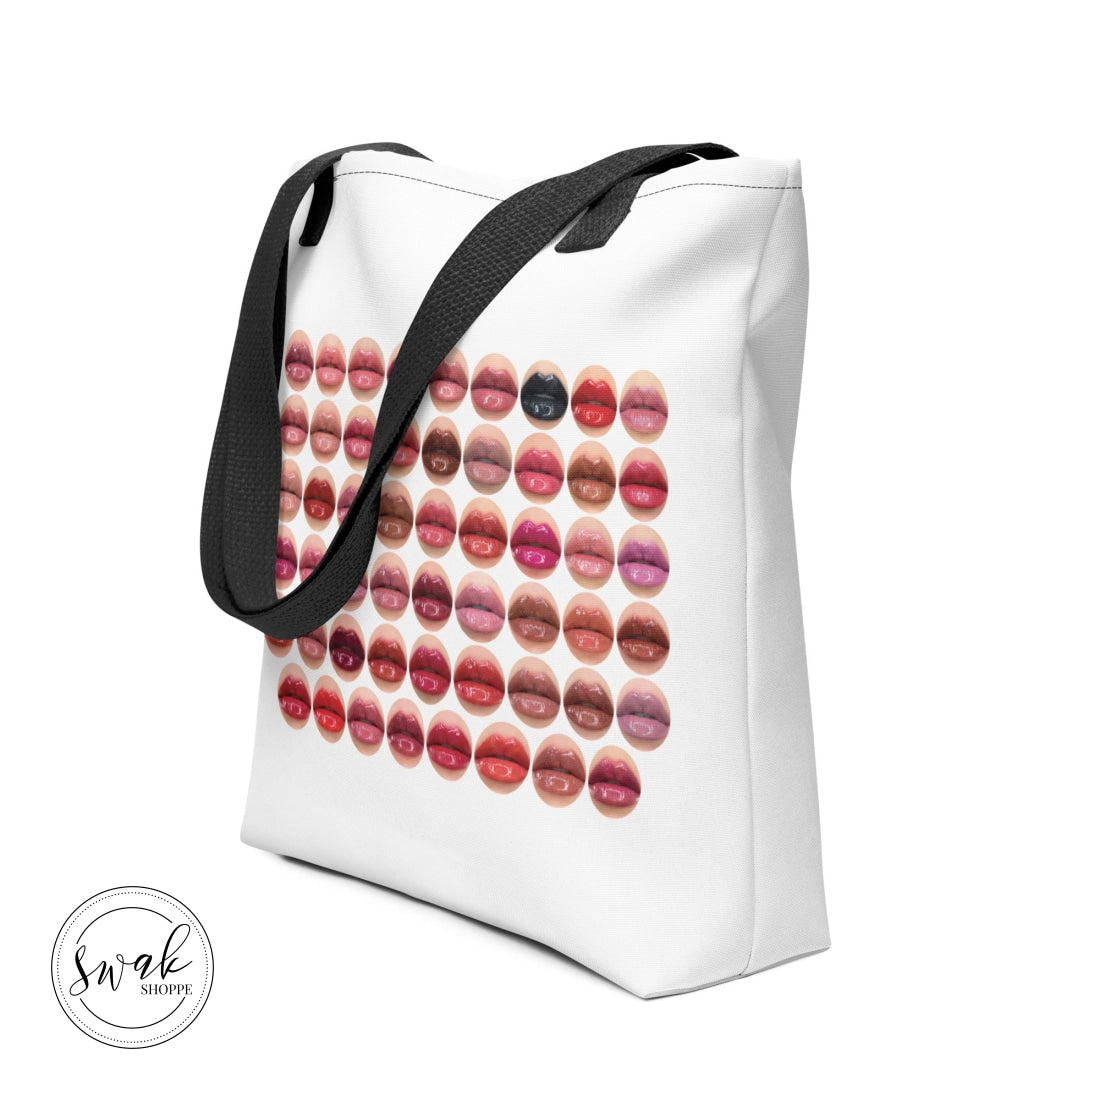 Swak Beauty Lips Circles Collage White Tote Bag